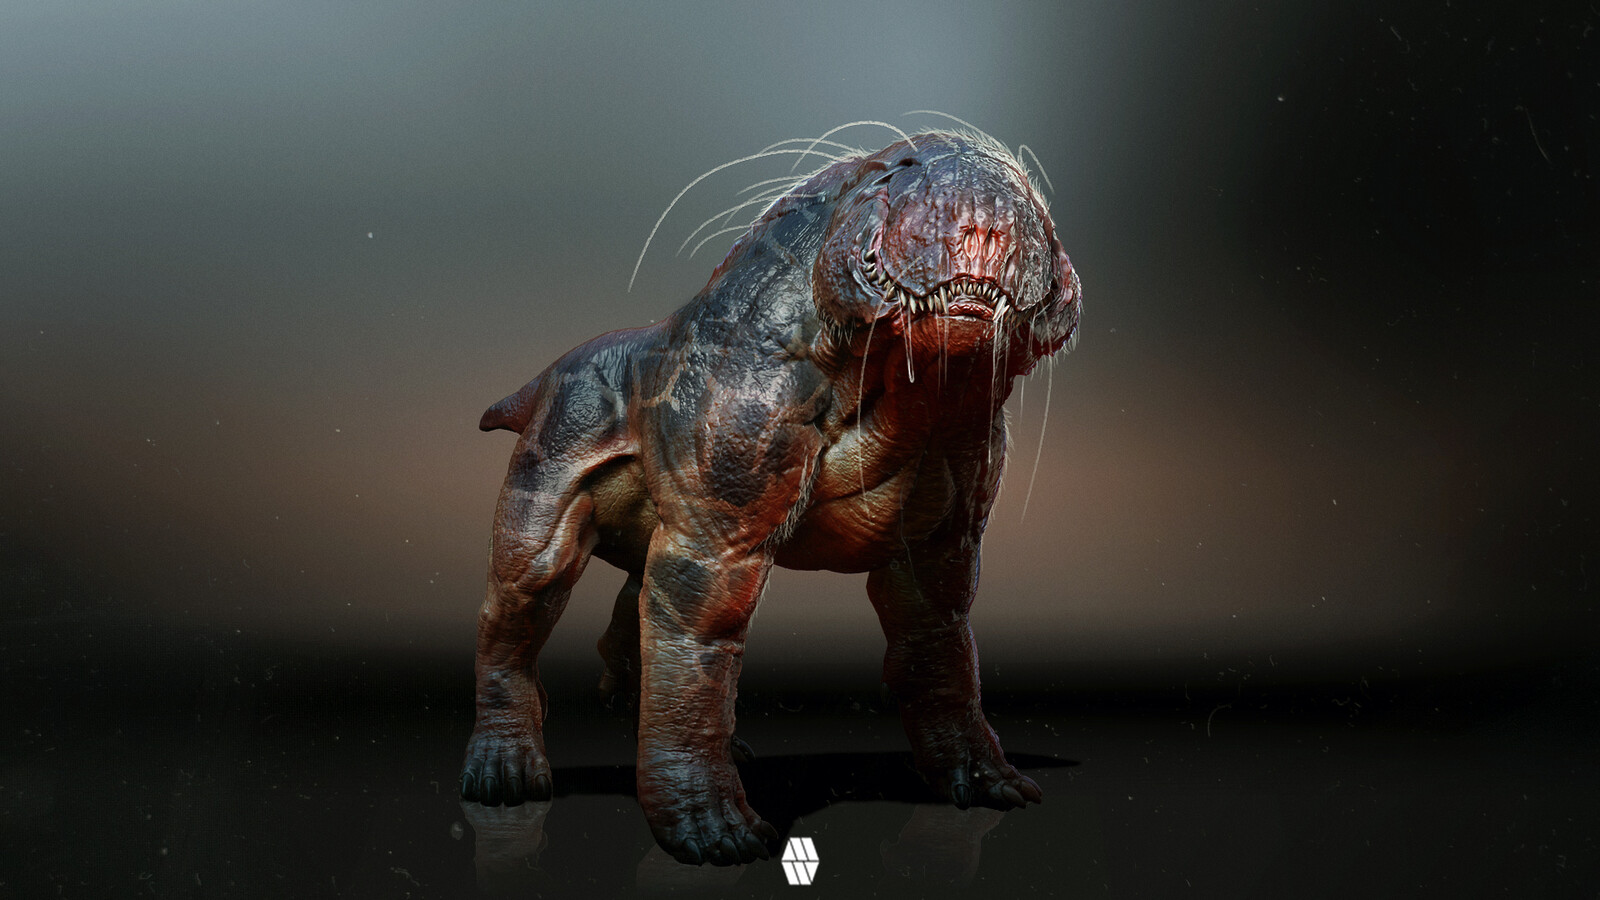 An Alien Emerges - 'Alien Hound' Concept Personal Project